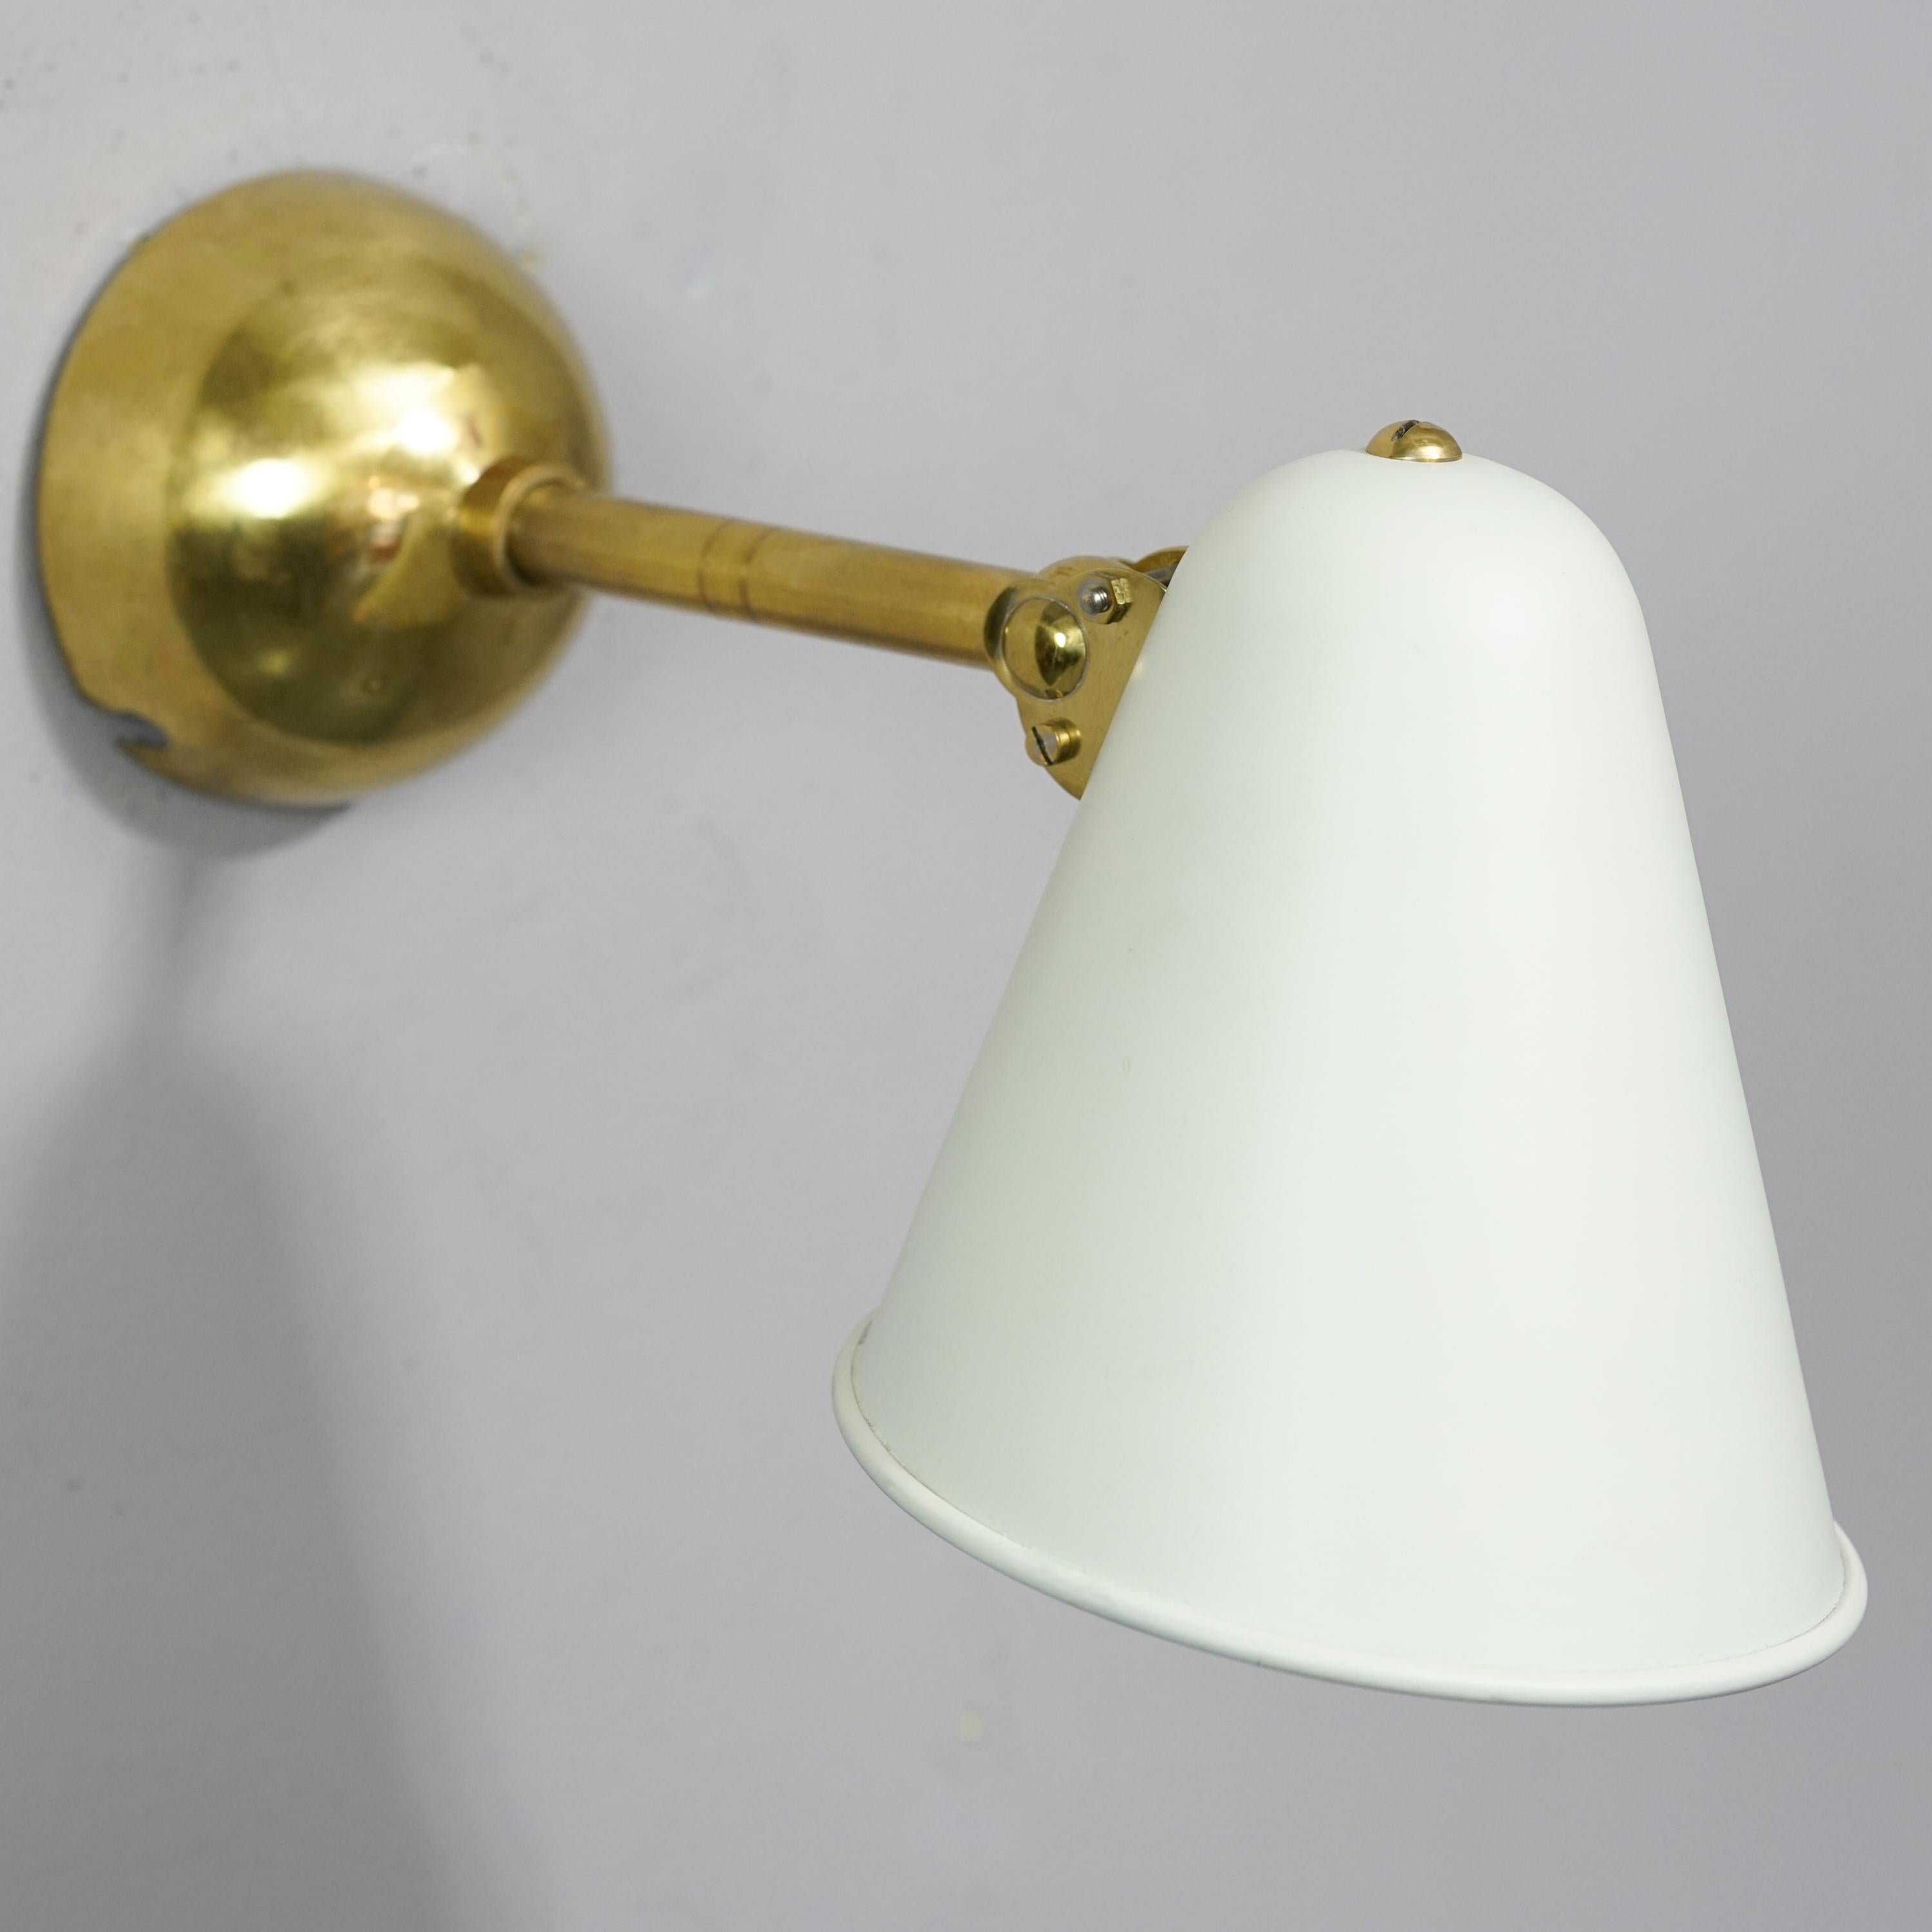  Wall light model 82200P, design Paavo Tynell,  manufactured Idman in the 1960s. Brass and metal. Good vintage condition, minor patina and wear consistent with age and use. 

This elegant wall light is a classic example of Finnish design from the